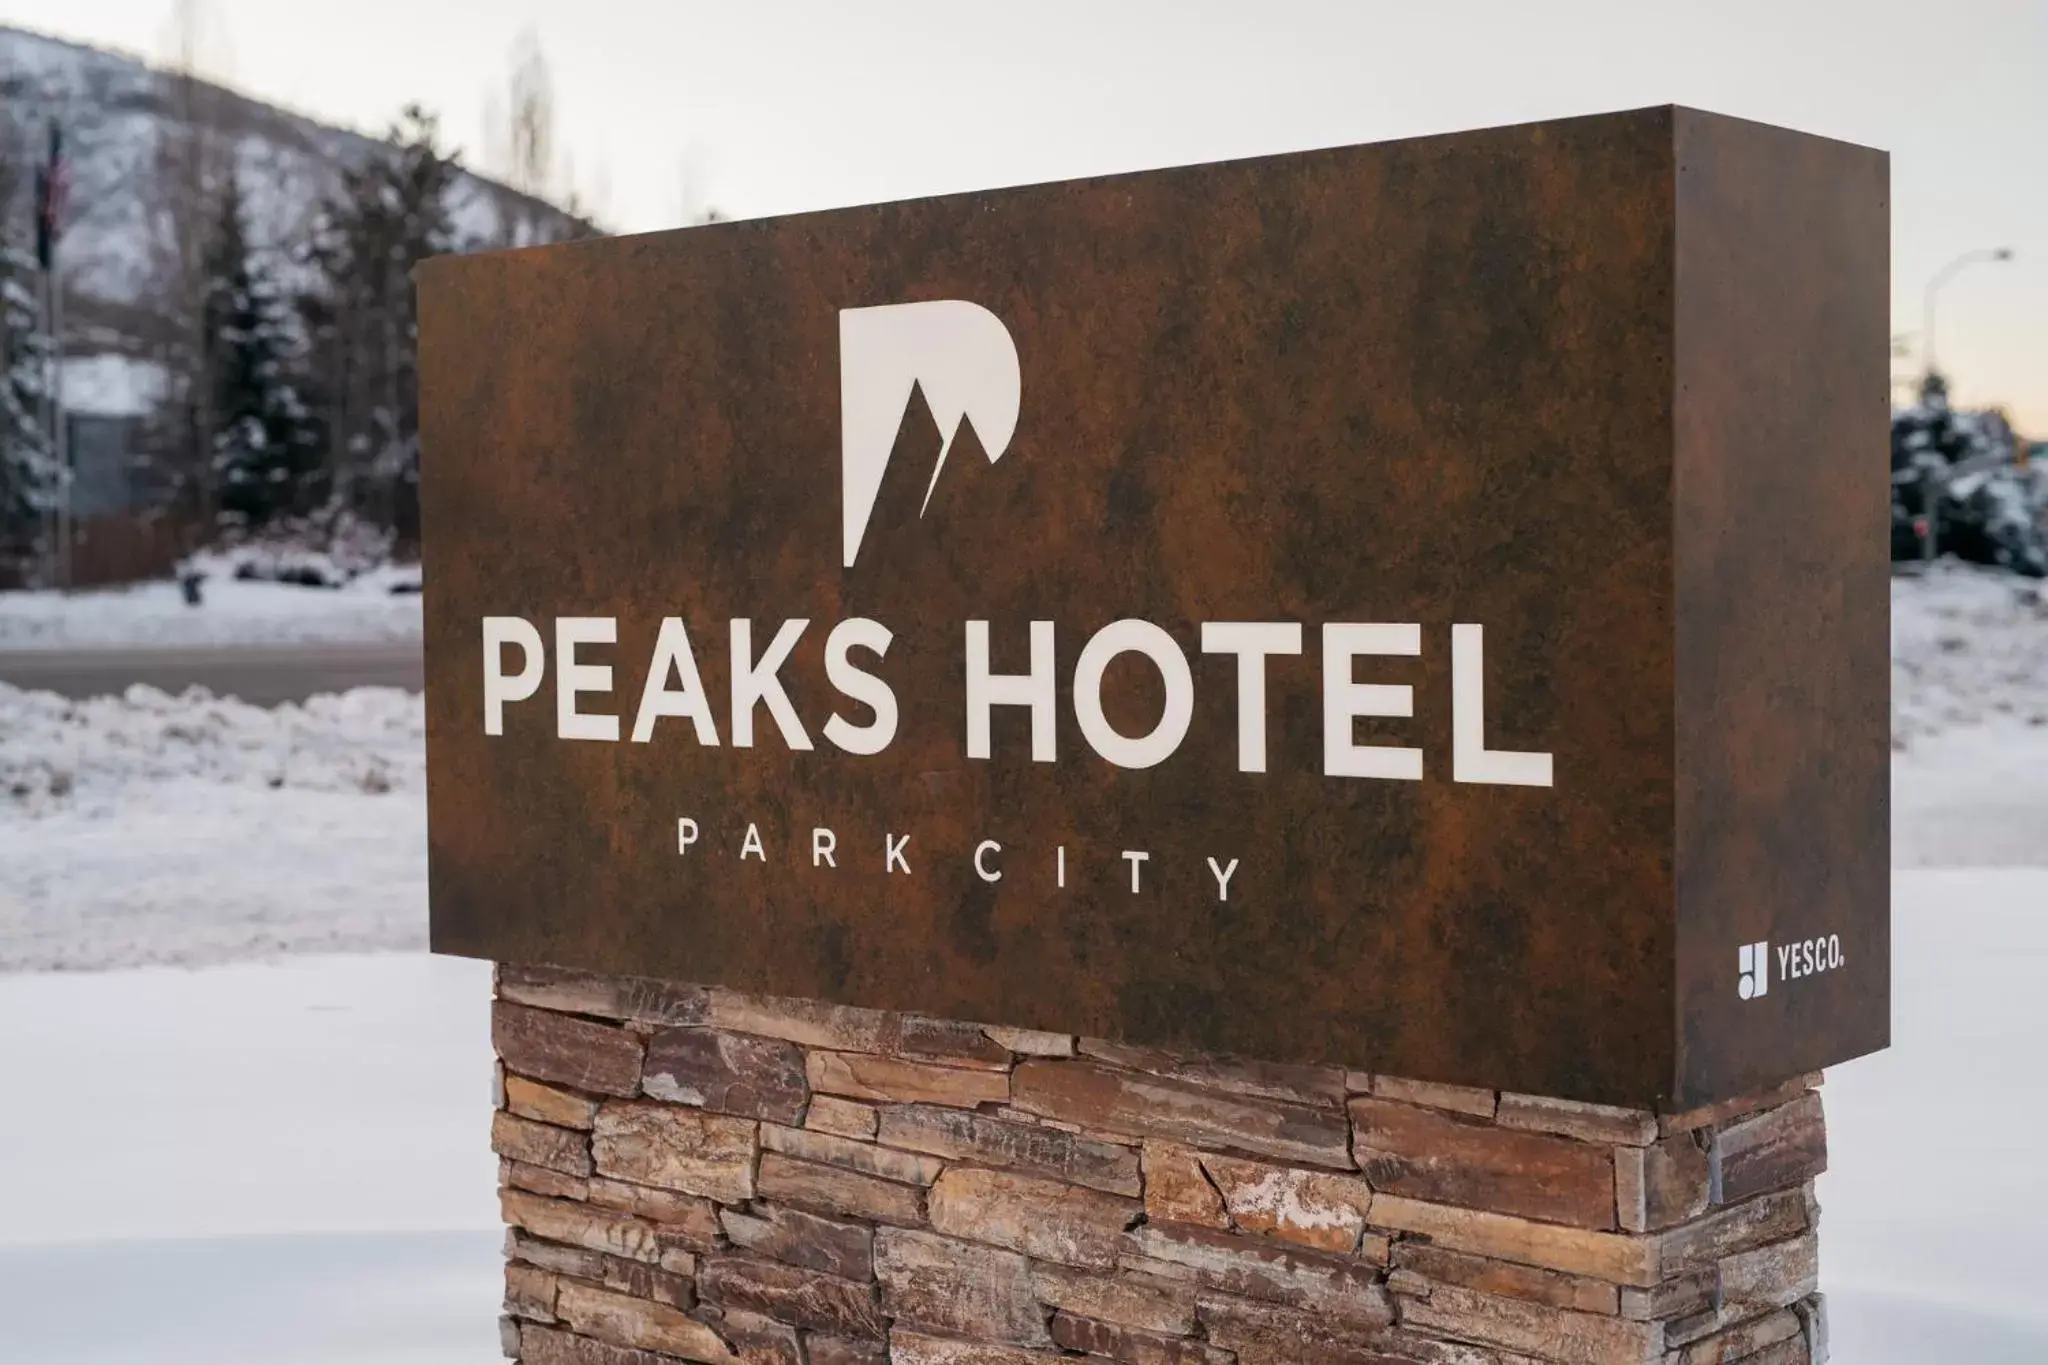 Property logo or sign in Park City Peaks